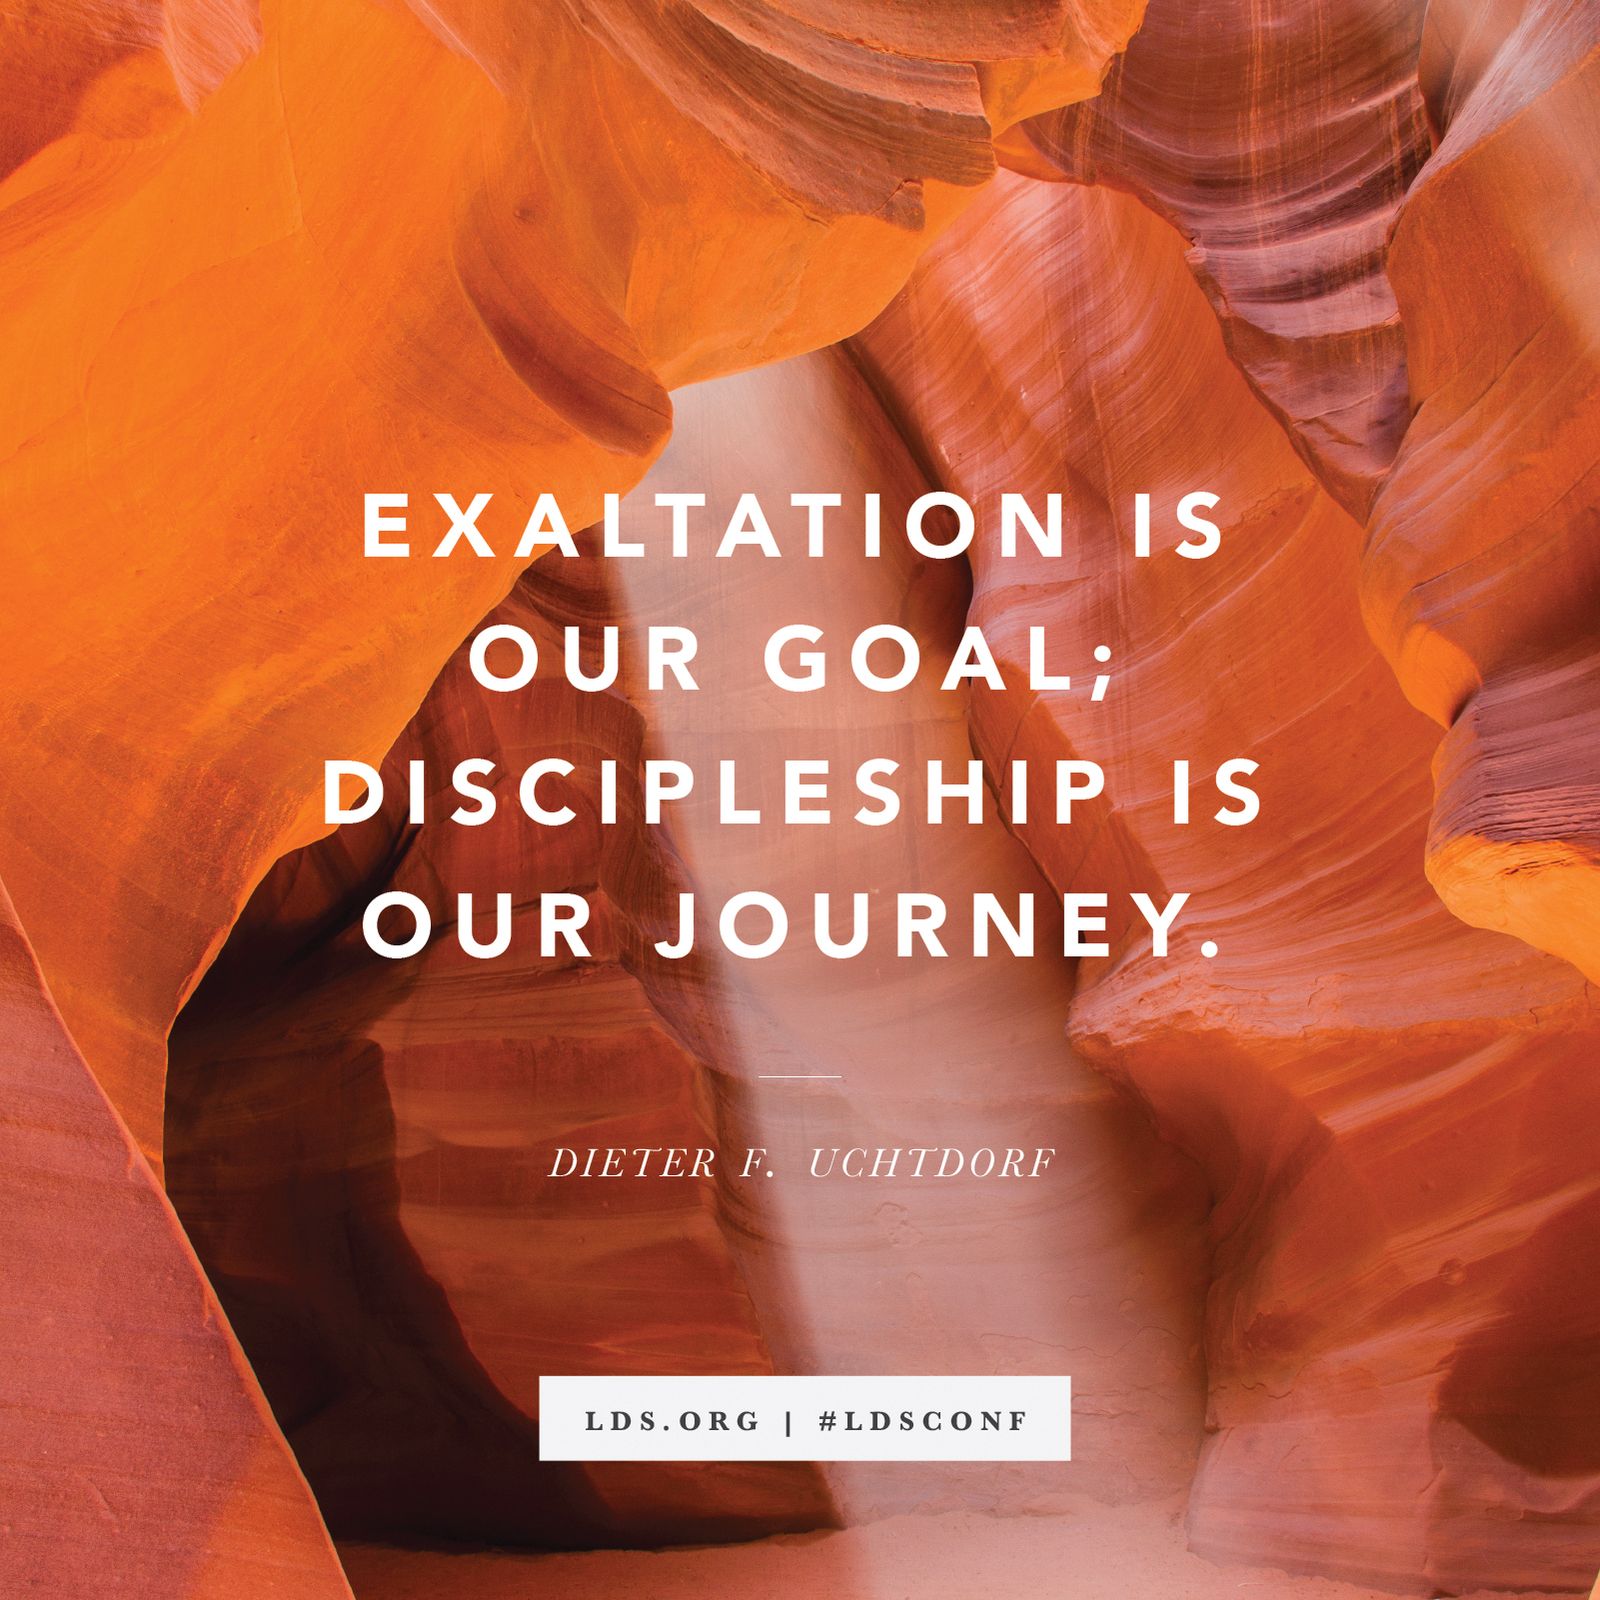 “Exaltation is our goal; discipleship is our journey.” —President Dieter F. Uchtdorf, “It Works Wonderfully!”